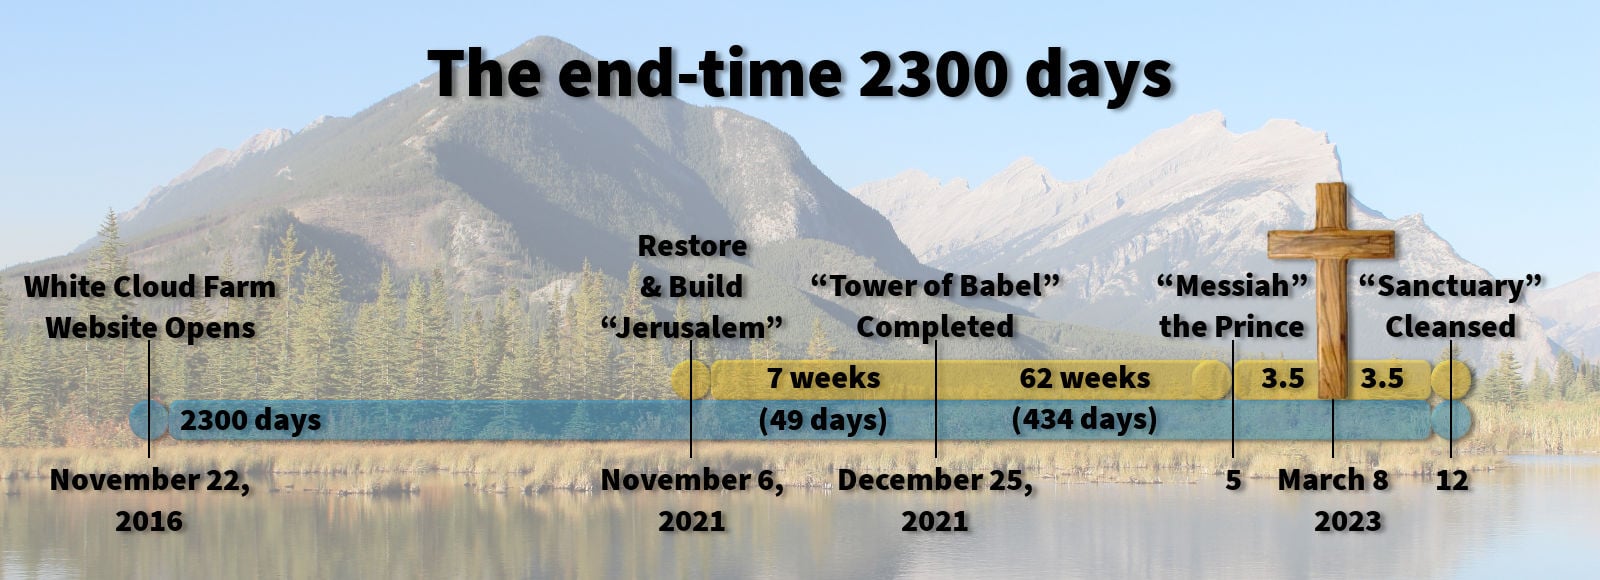 The 2300 days of the end times.